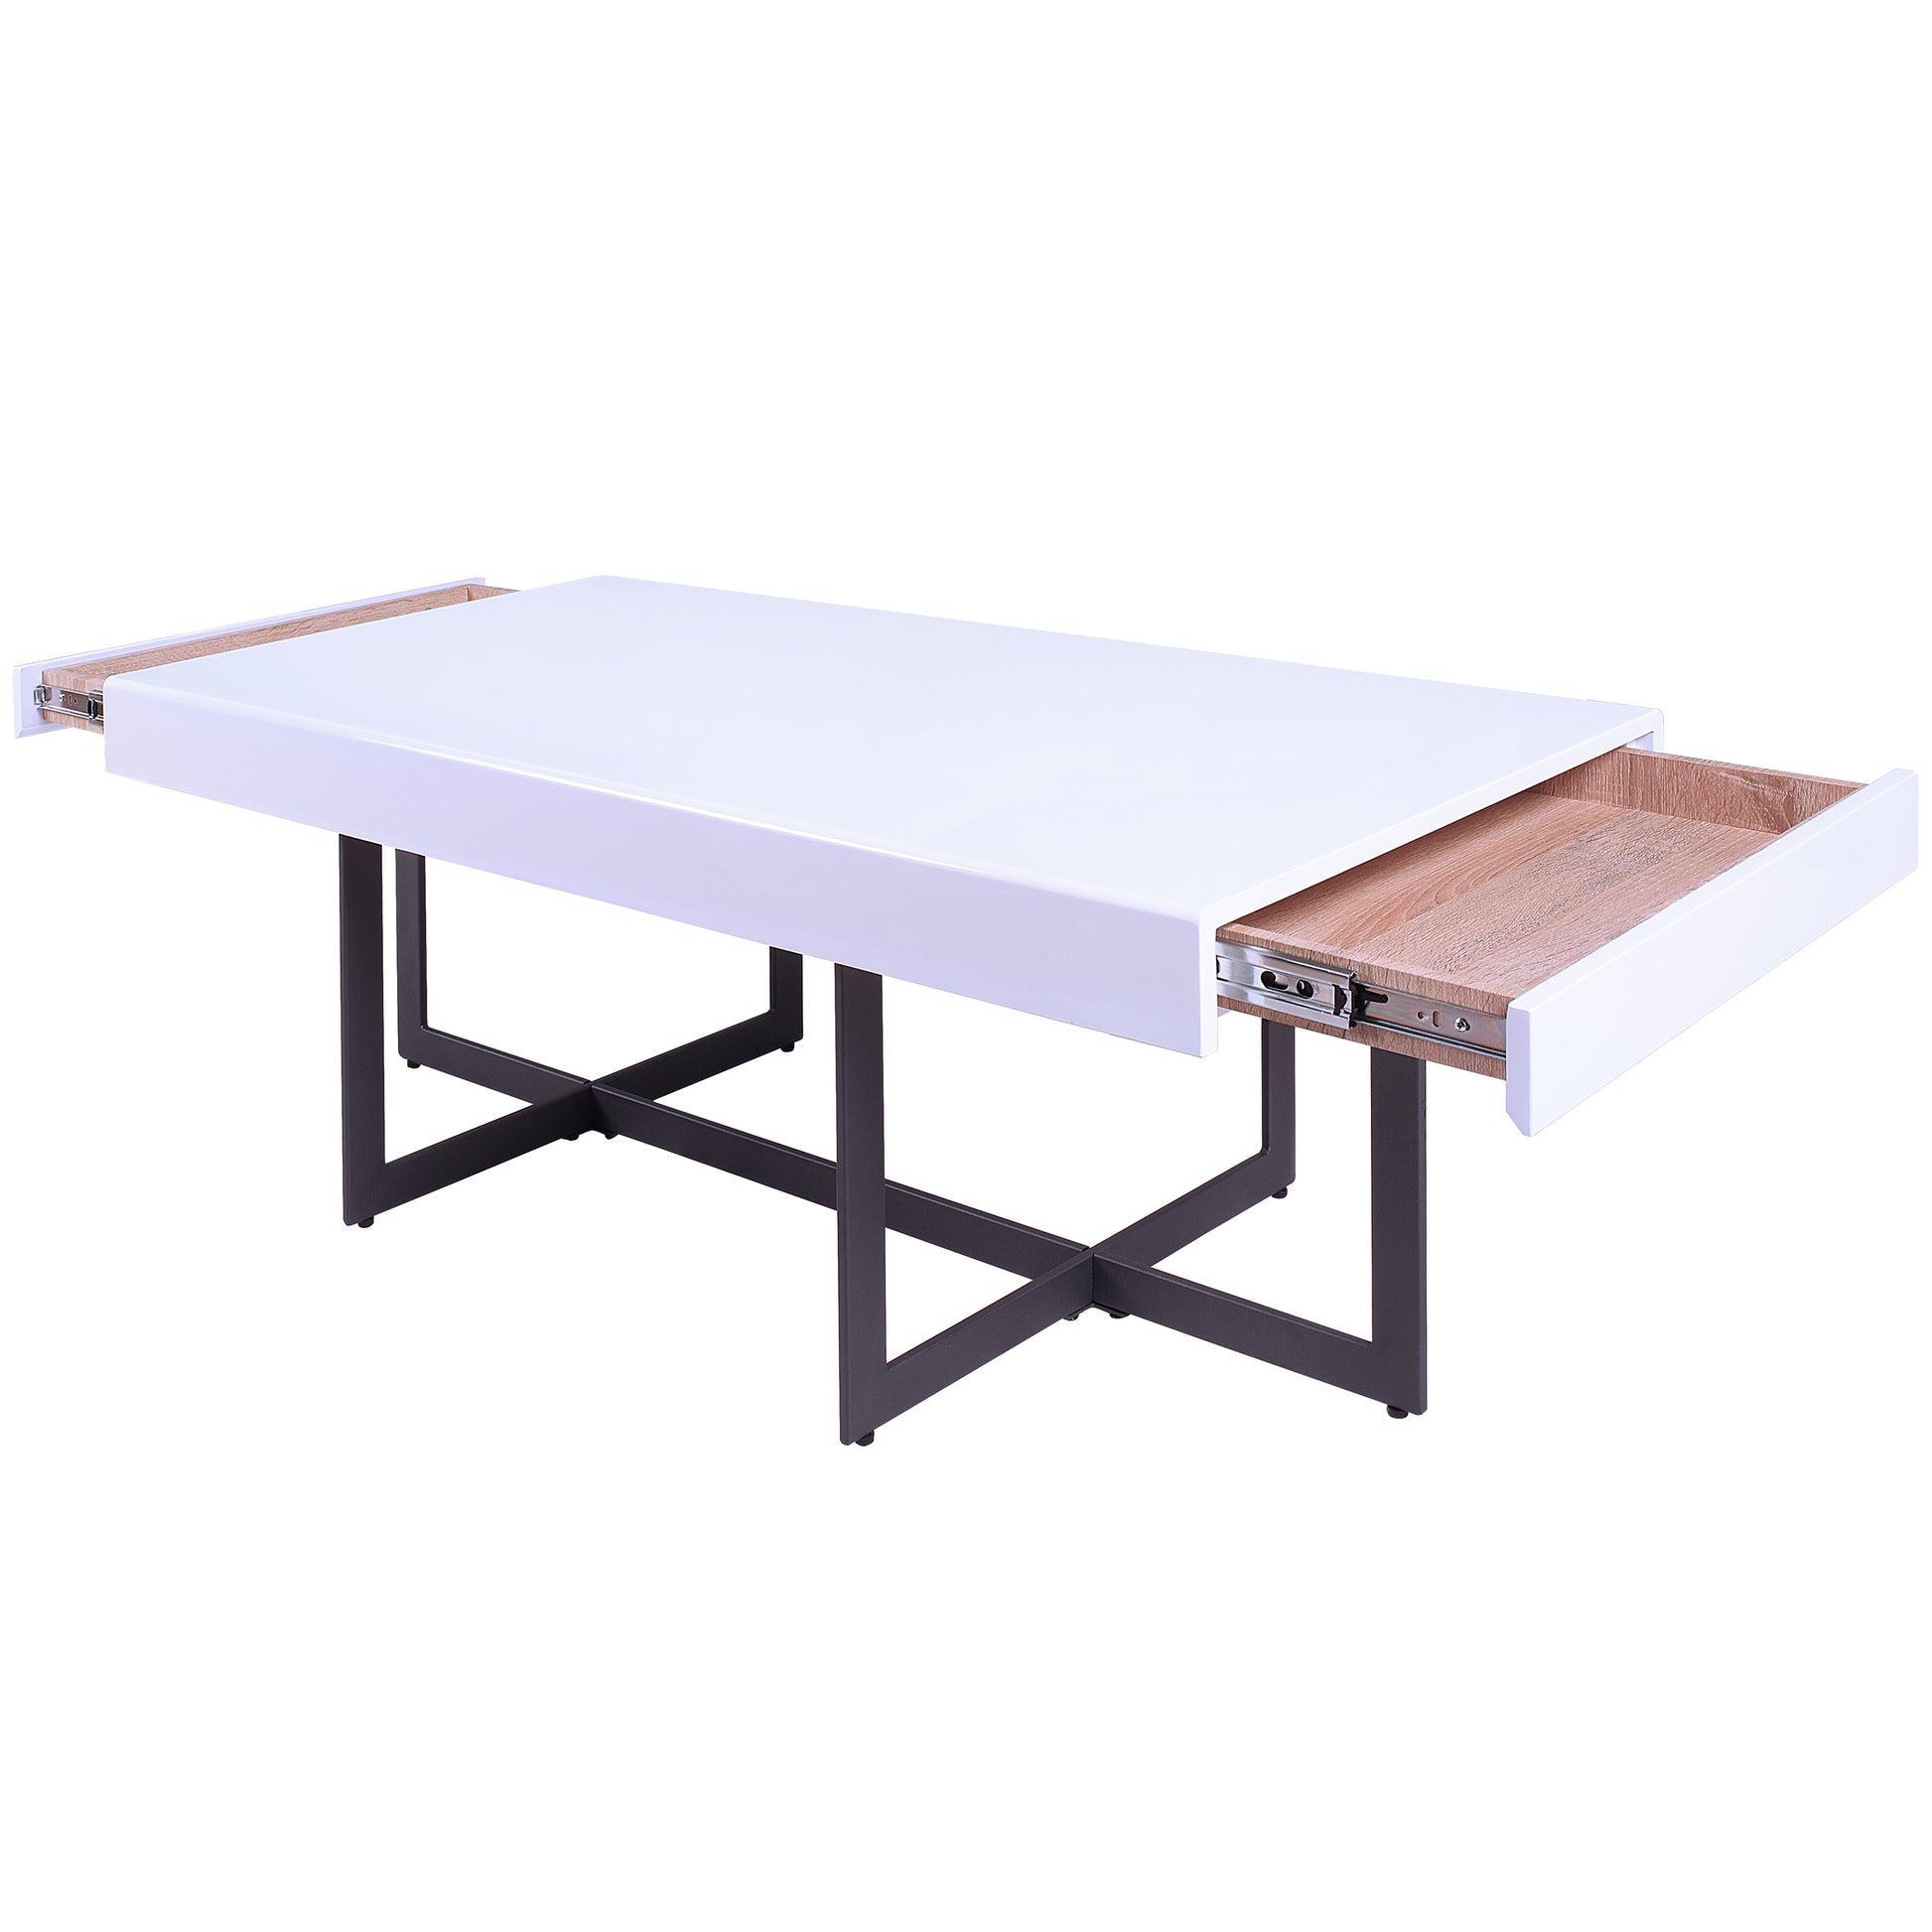 Left angled coffee table only from a three-piece modern white high gloss and gunmetal storage coffee table set with hidden drawers open on a white background